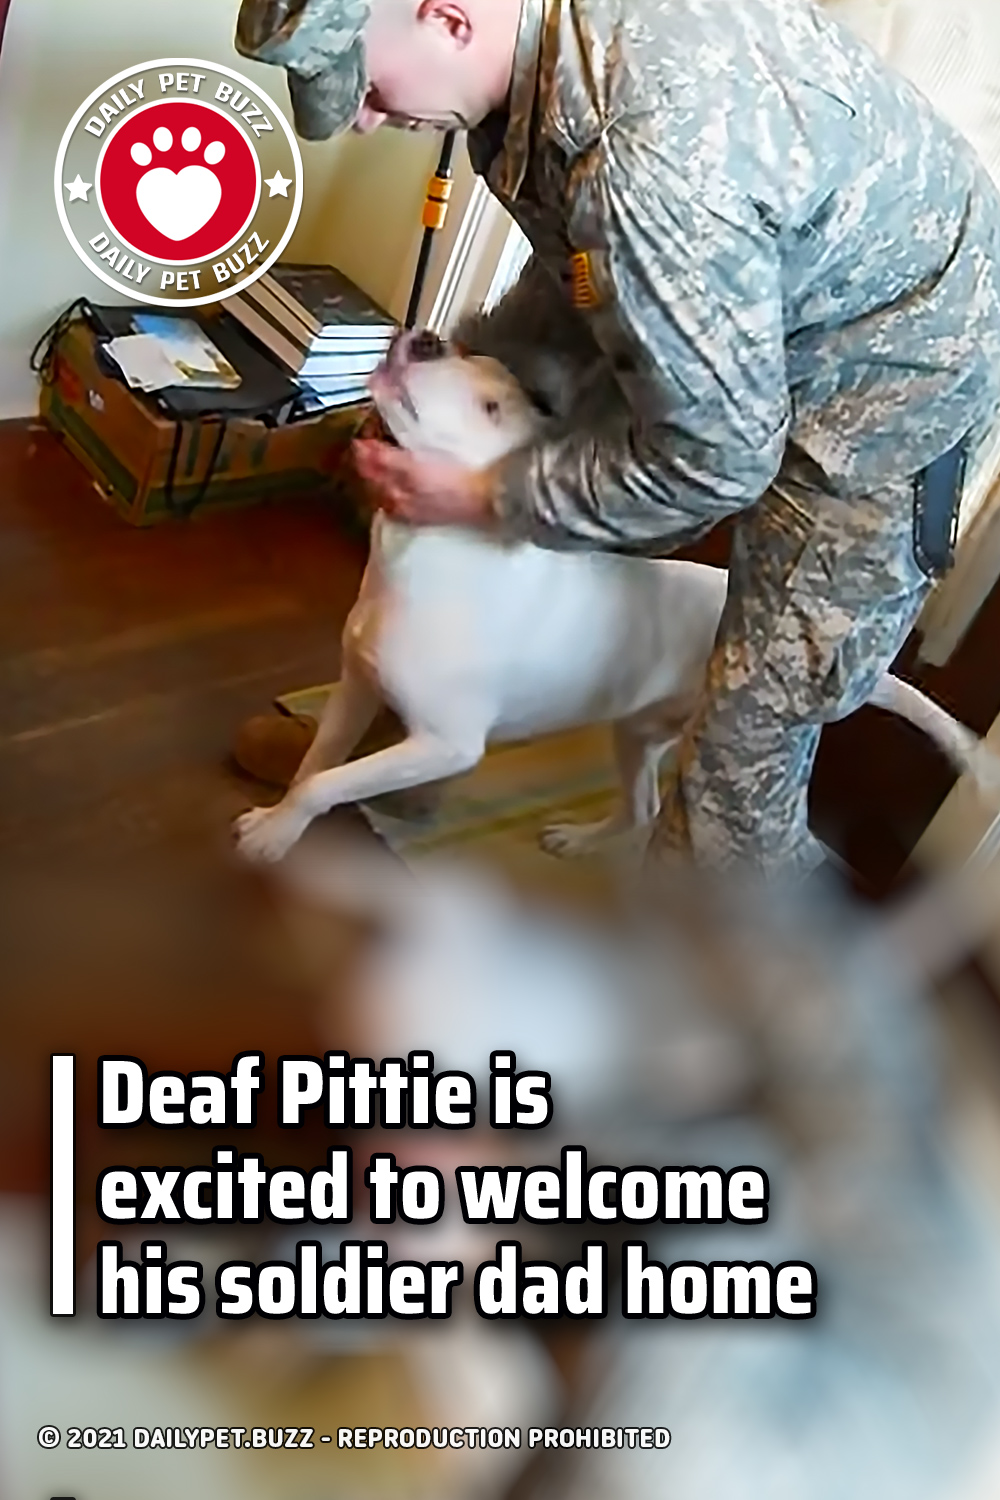 Deaf Pittie is excited to welcome his soldier dad home